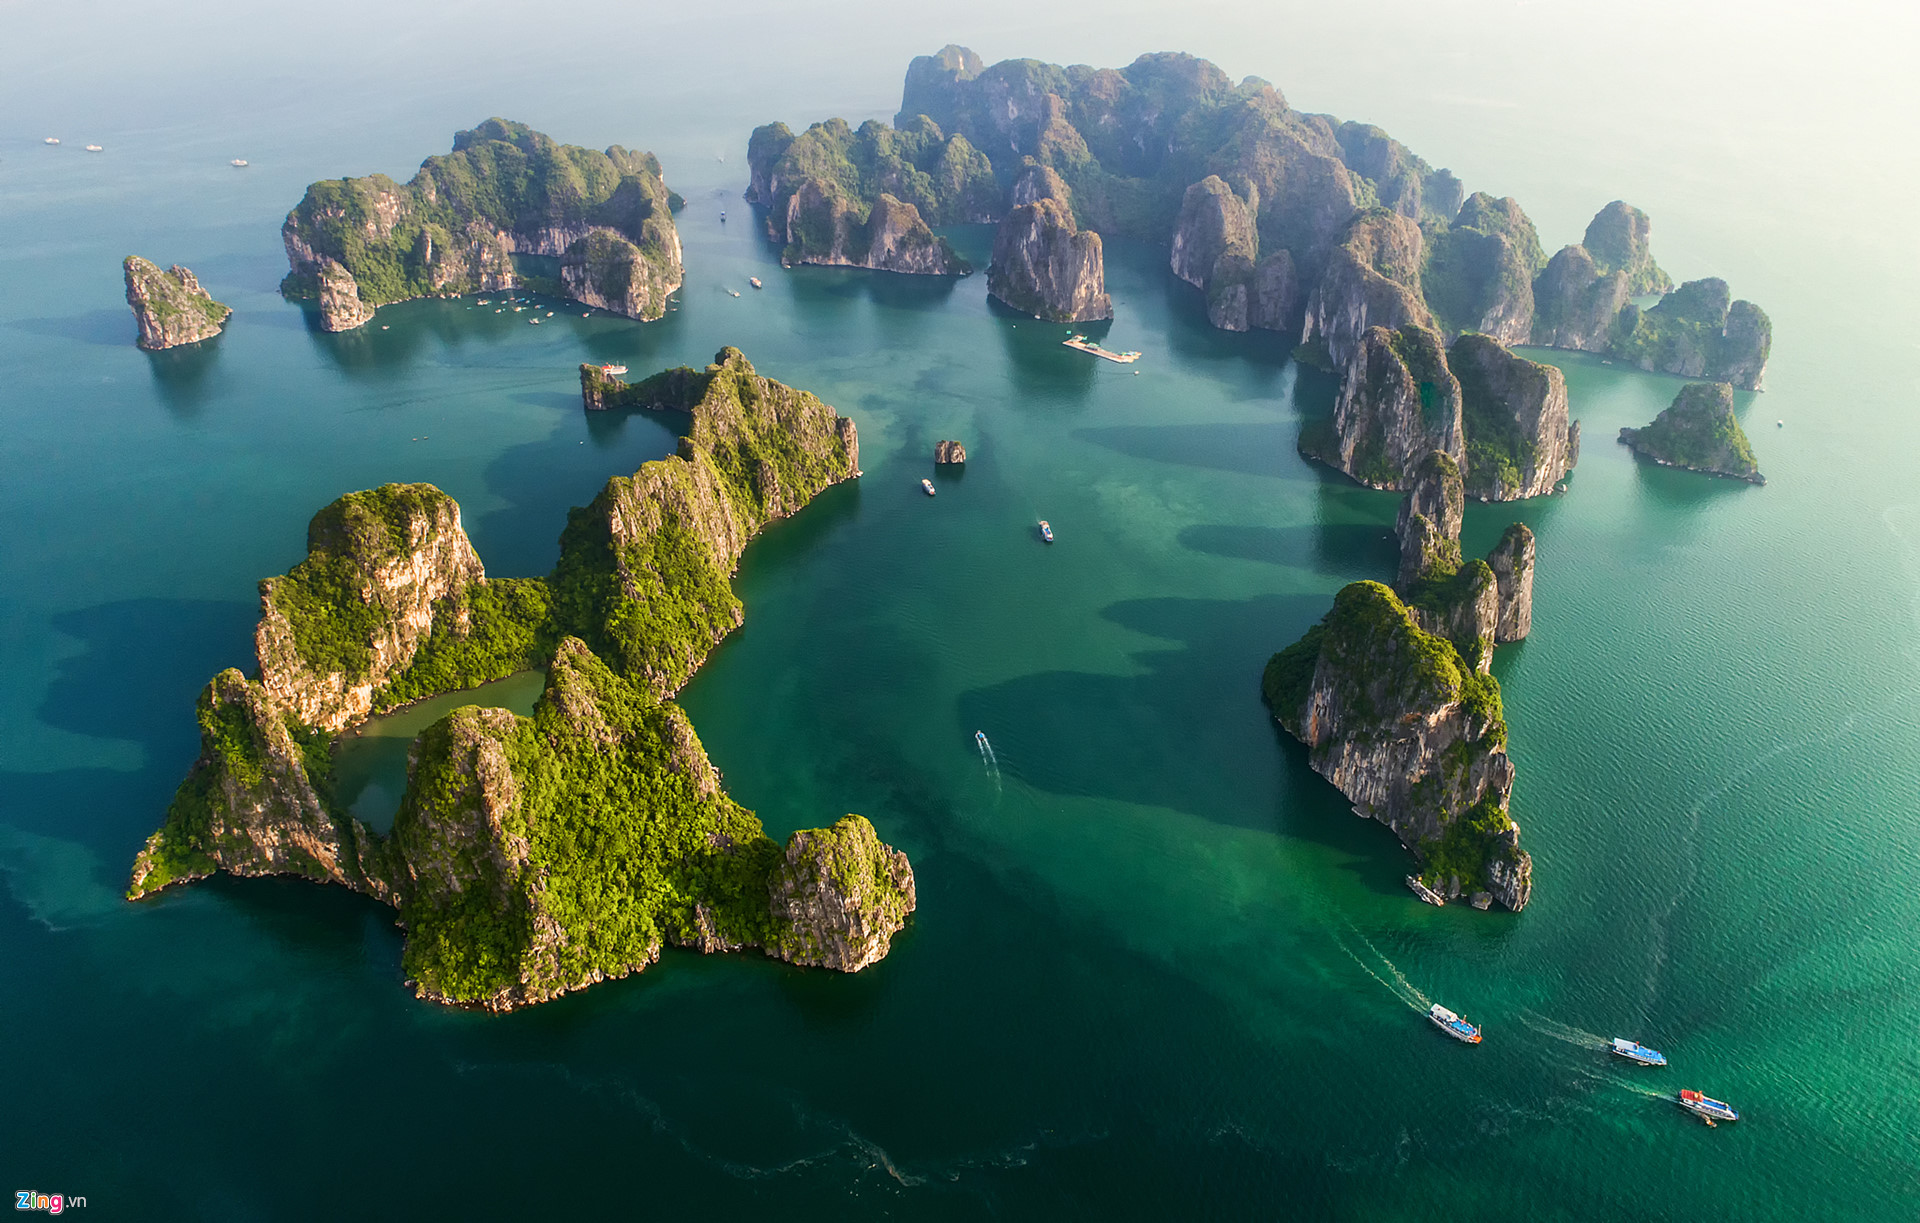 Dreaming of a tropical paradise, Look no further than this hidden gem - the best beach in Halong Bay